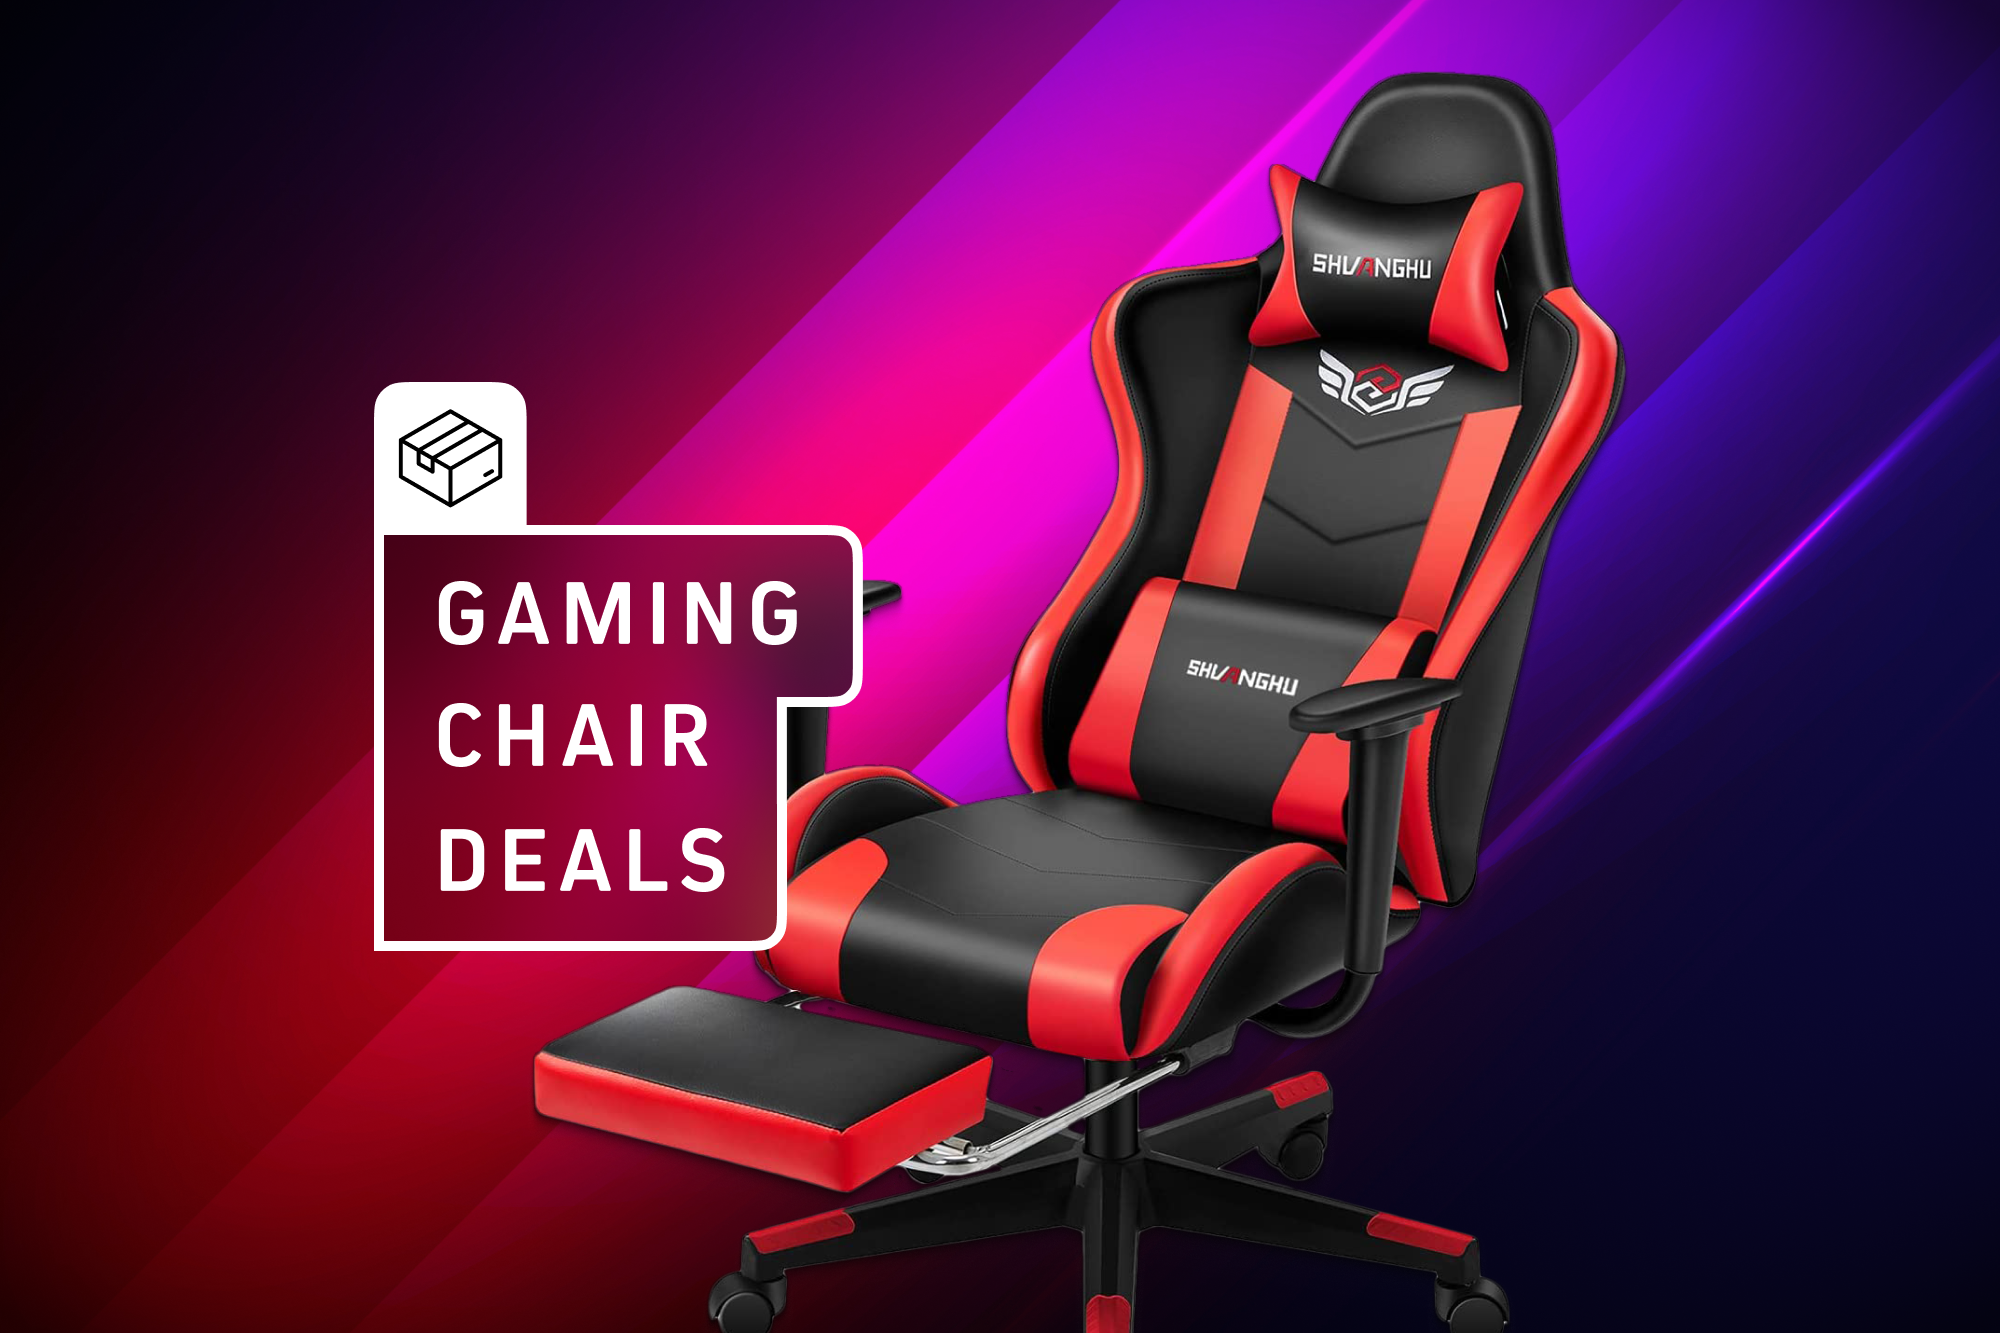 https://www.digitaltrends.com/wp-content/uploads/2022/07/Best_Prime_Day_GAMING_CHAIR_Deals_Thumbnail-2022.png?fit=720%2C479&p=1